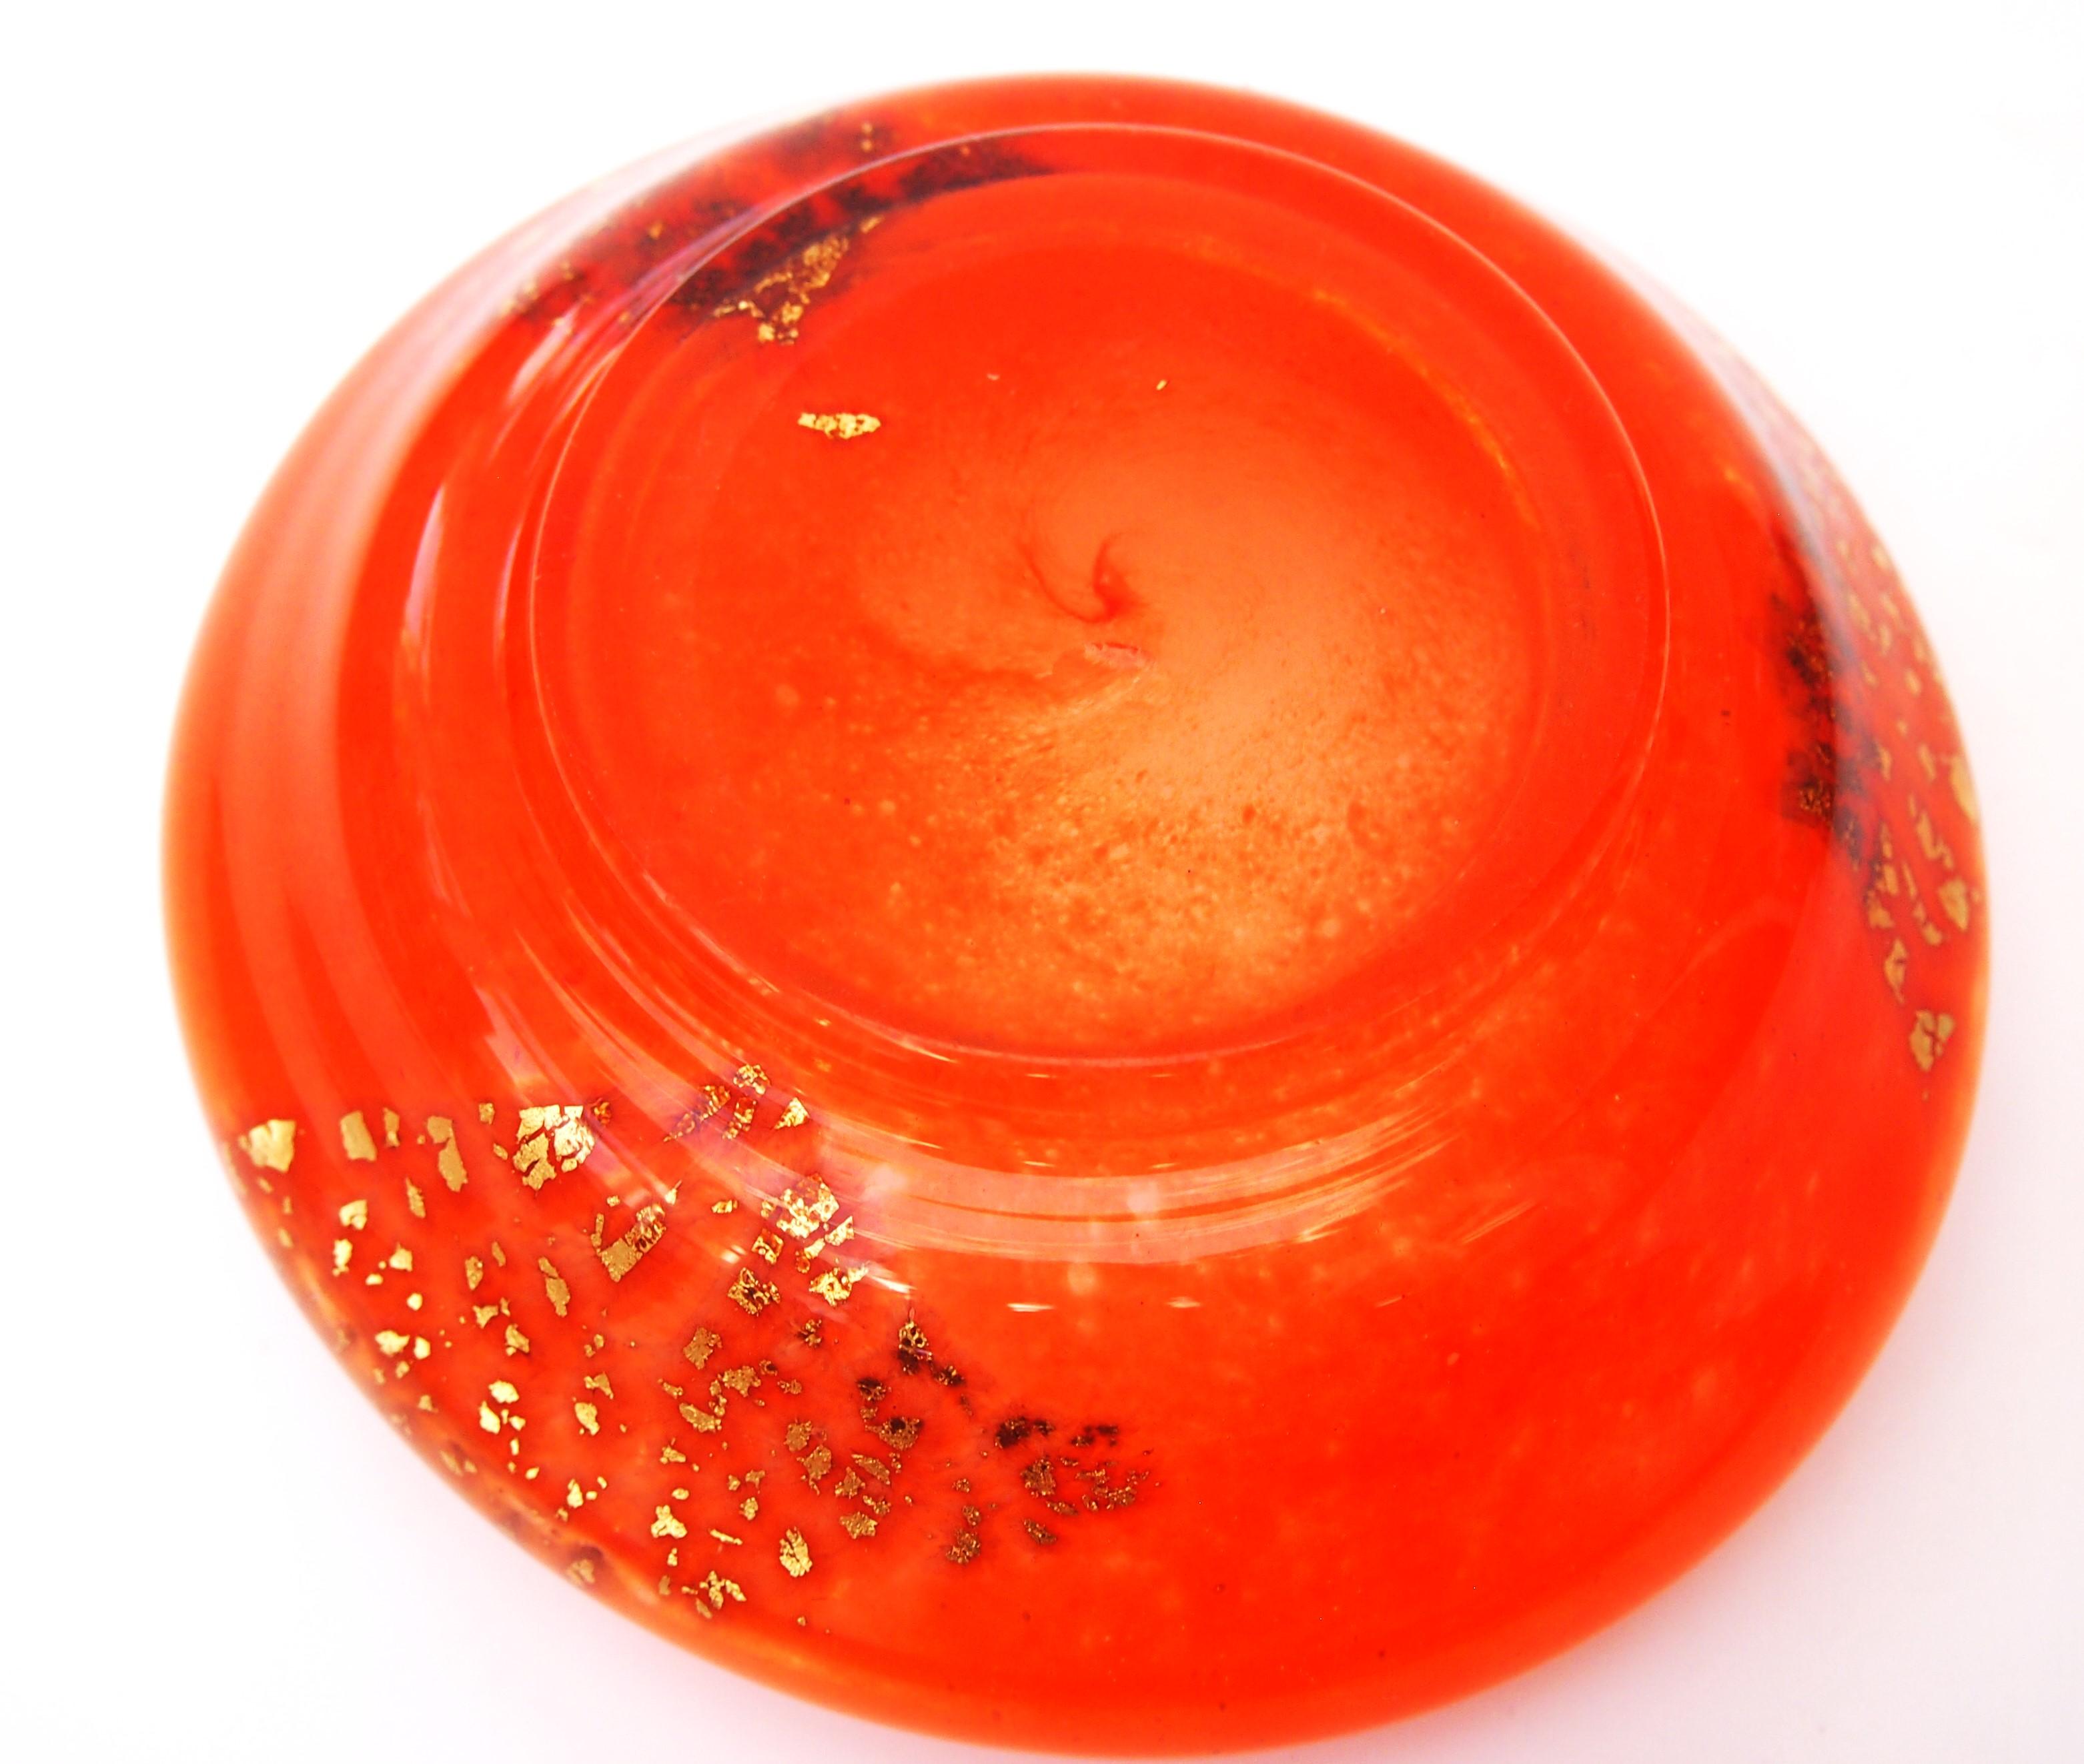 Art Glass Daum glass 'Jades' orange box and cover with gold leaf inclusions c1920 -signed For Sale